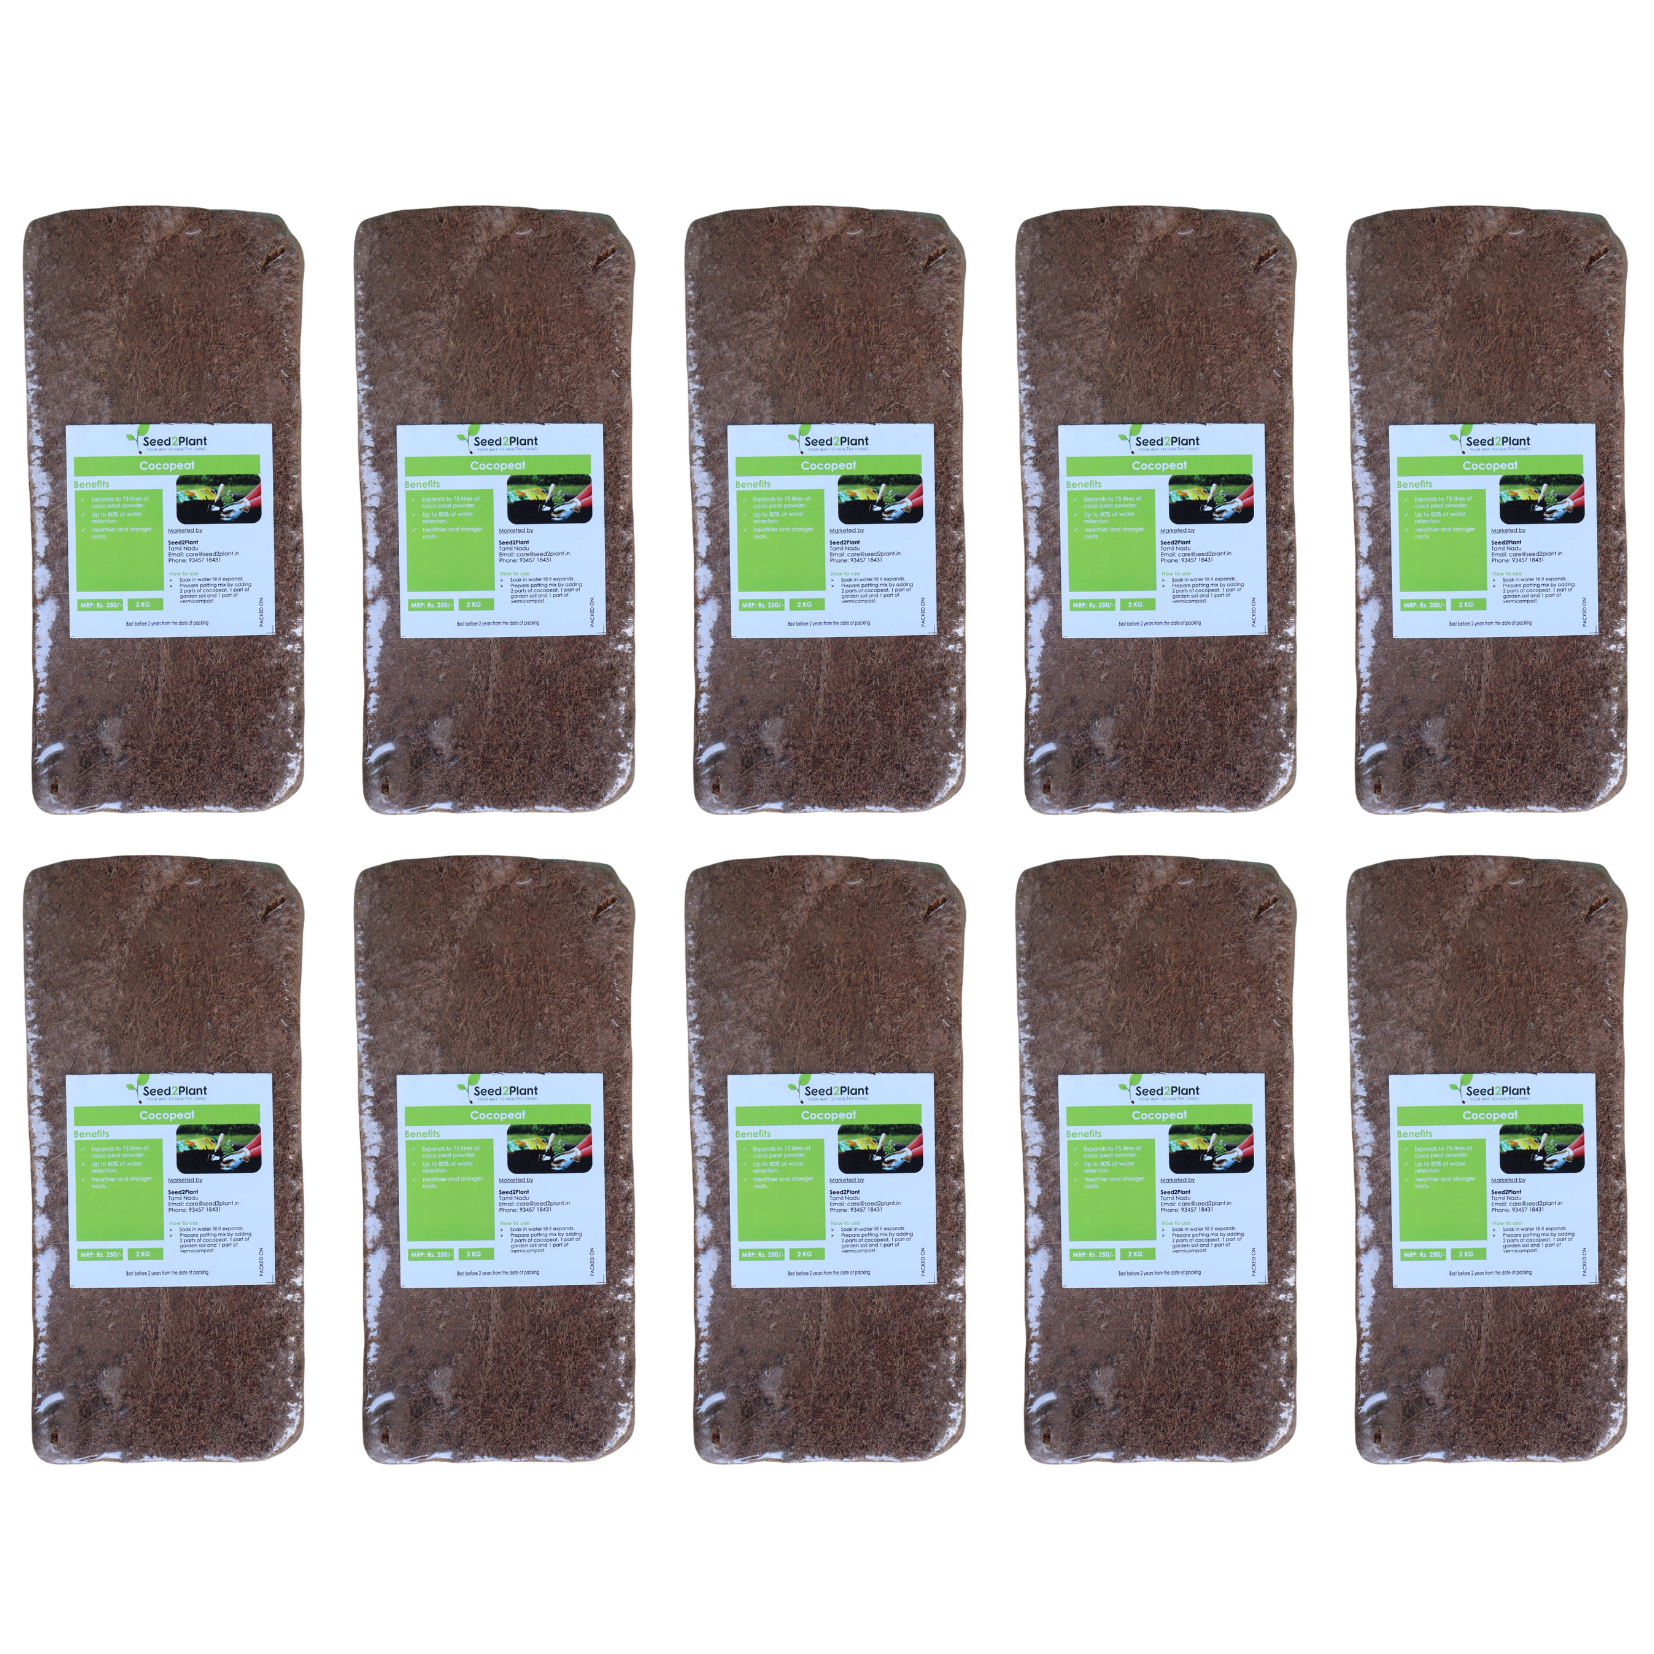 Premium quality Coco Peat - Sieved &amp; Washed